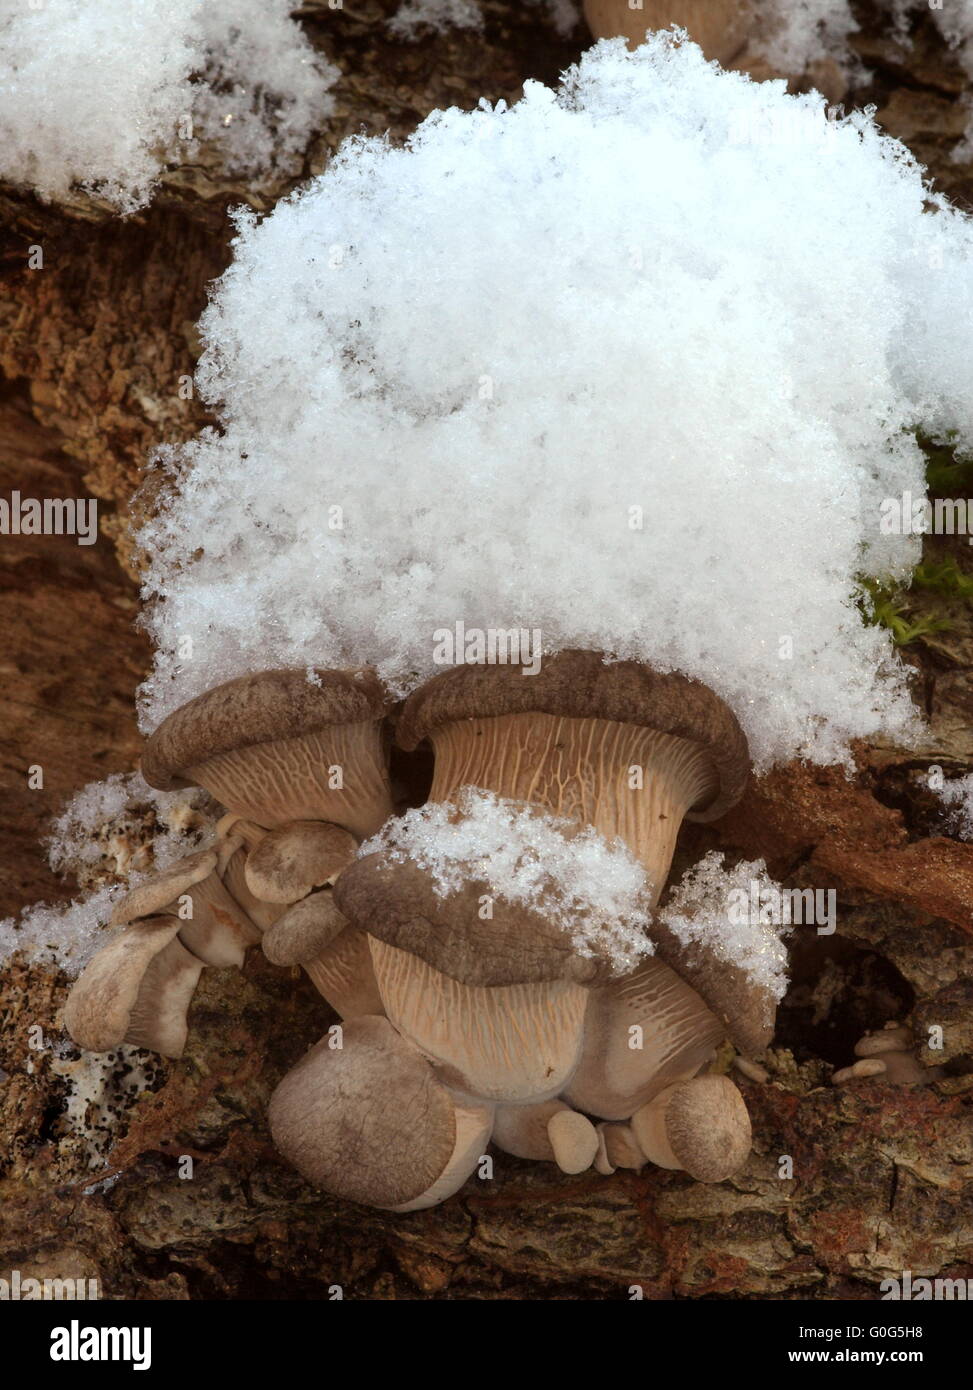 Oyster mushrooms with snow Stock Photo